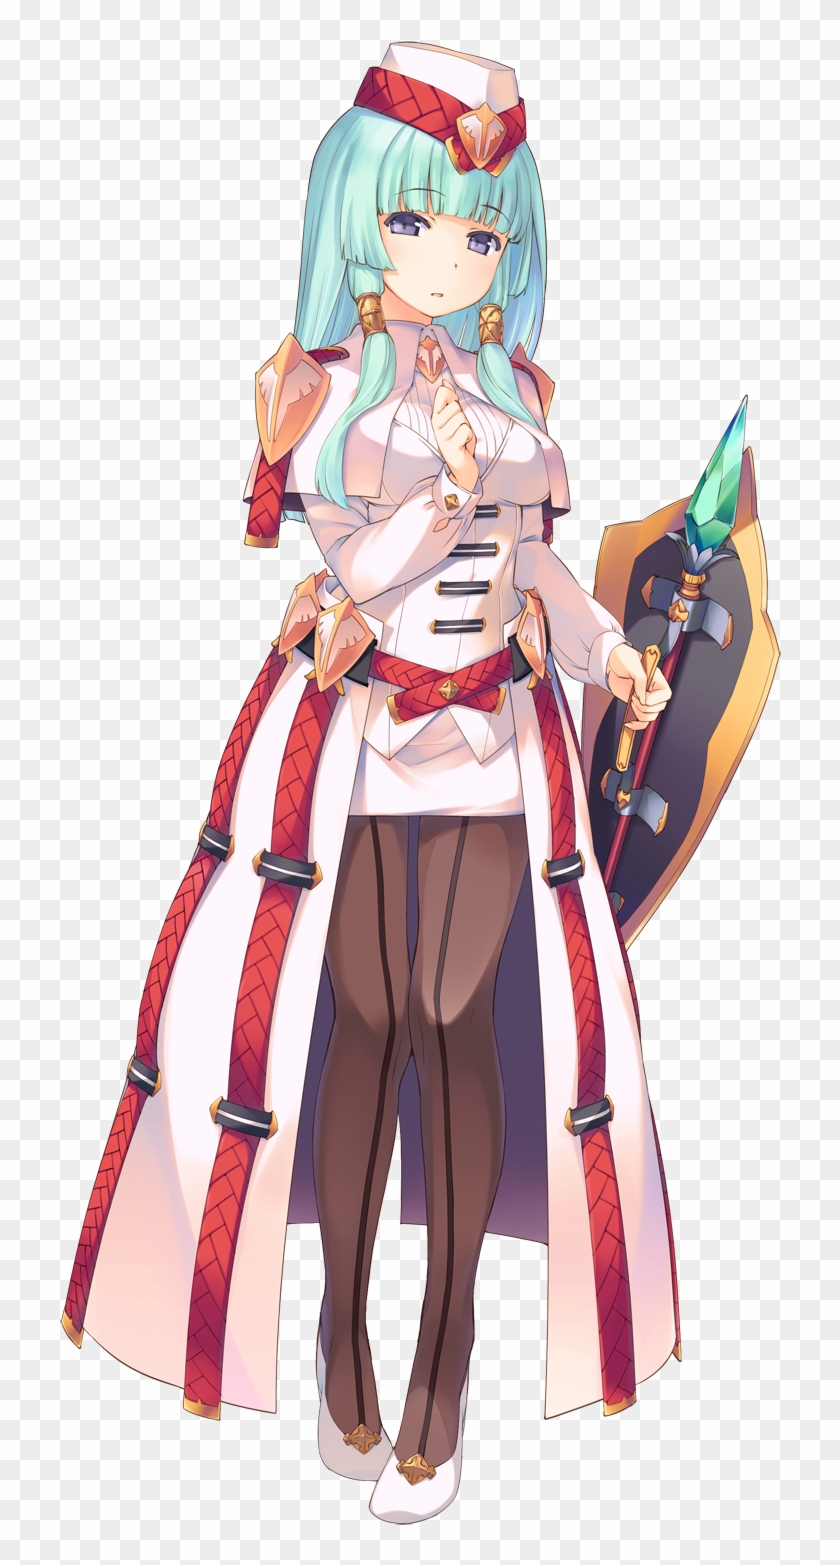 Click For Full Sized Image Fiora Marsh - Dungeon Travelers 2 Character Portrait Clipart